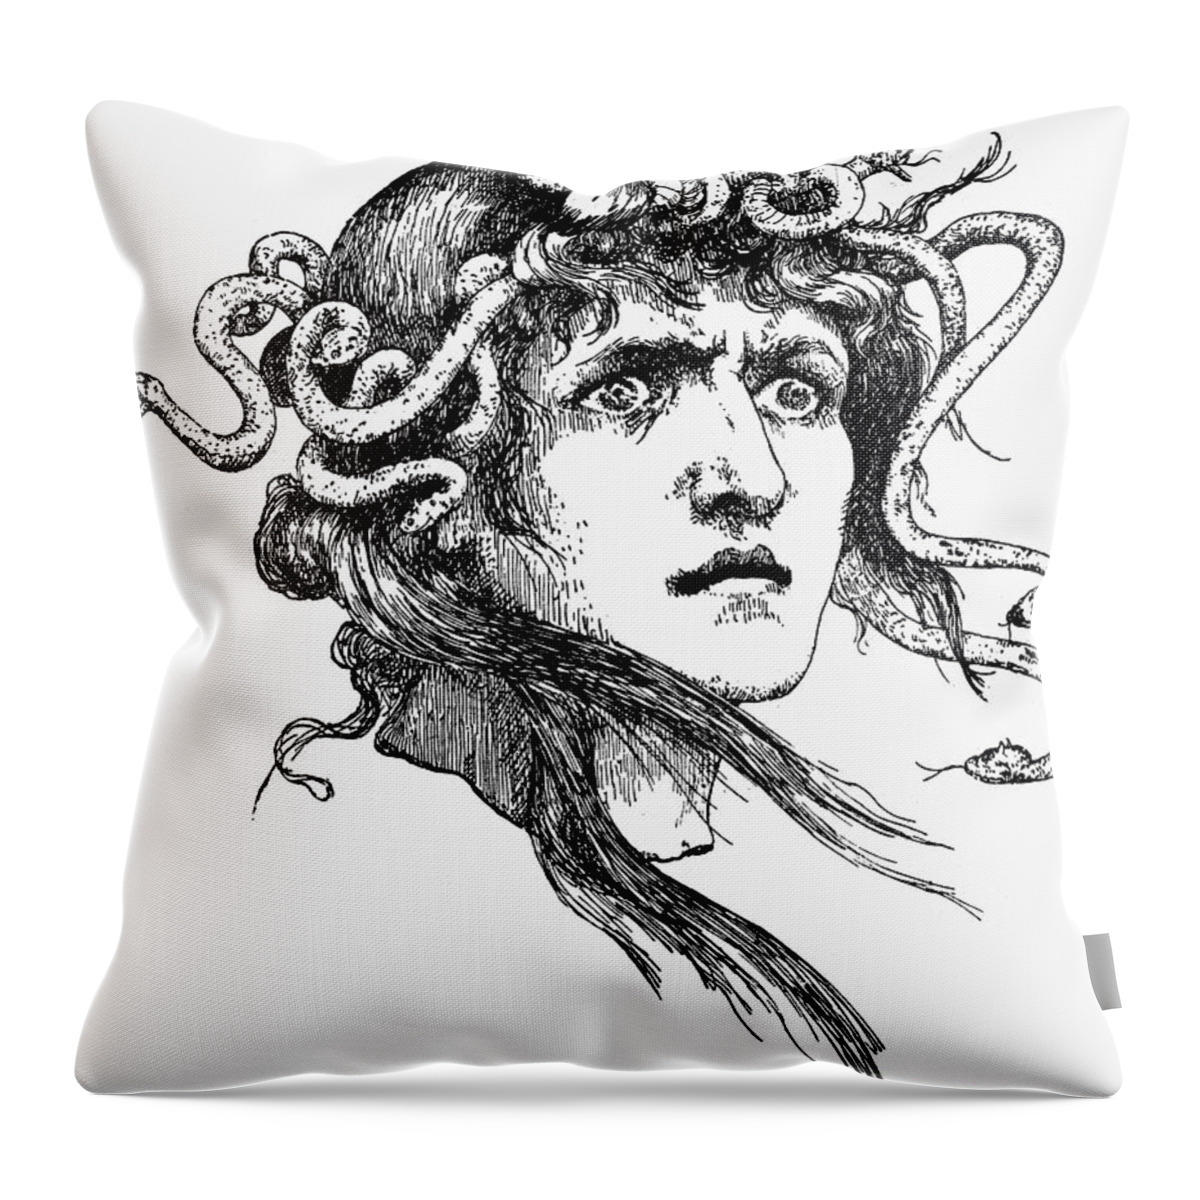 Ancient Throw Pillow featuring the photograph Mythology: Medusa by Granger